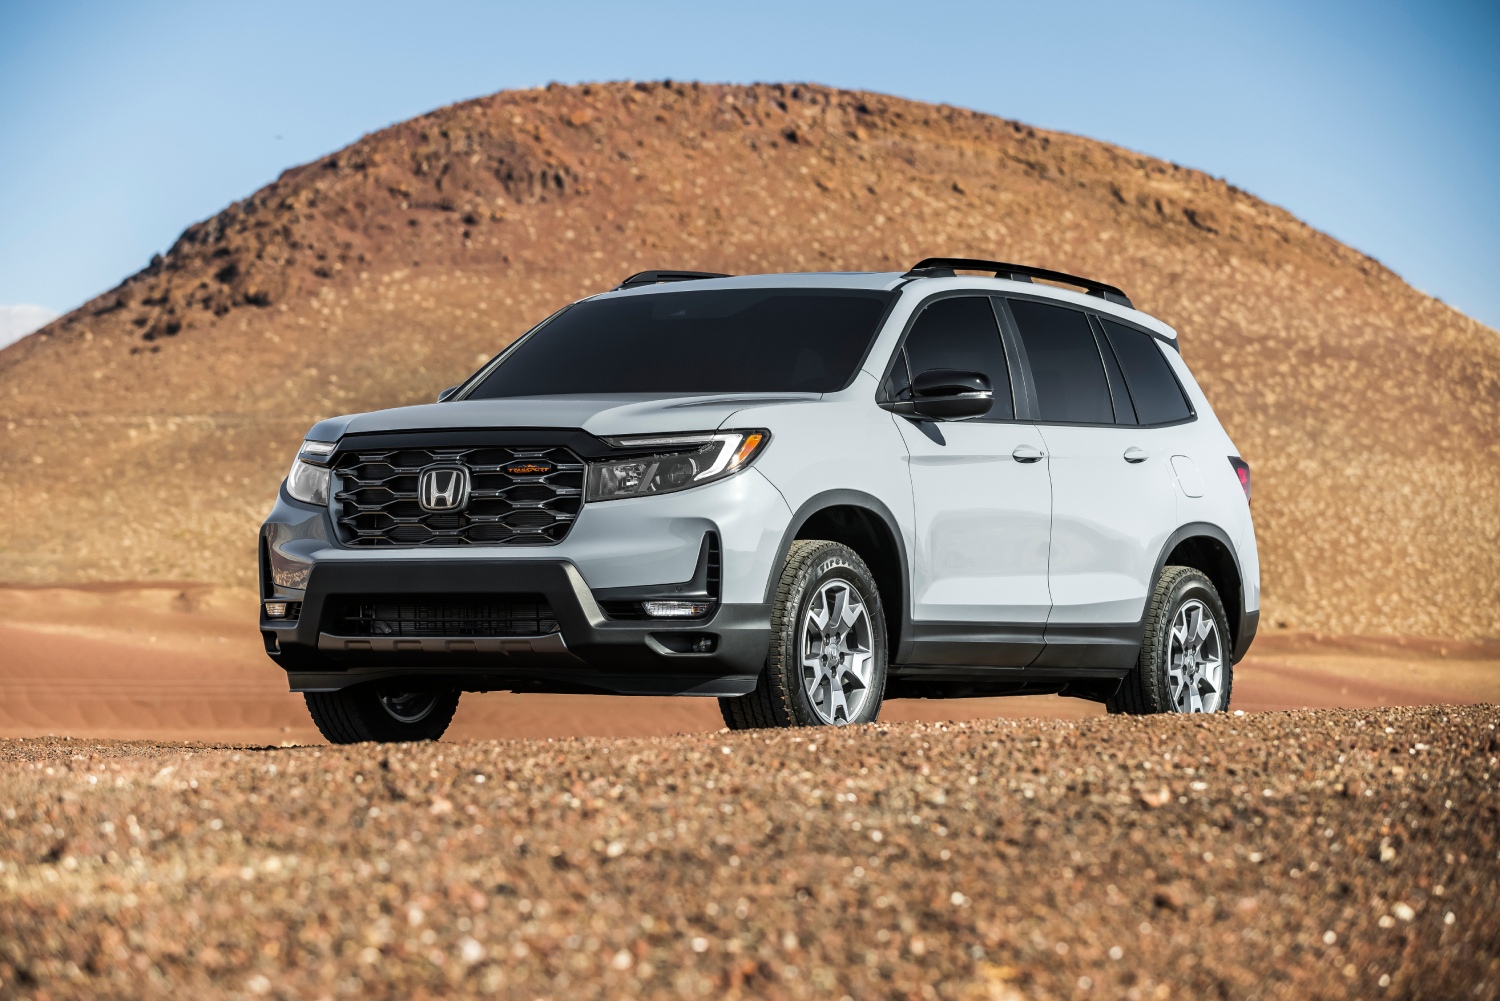 Reliable midsize SUVs to seek out include this Honda Passport